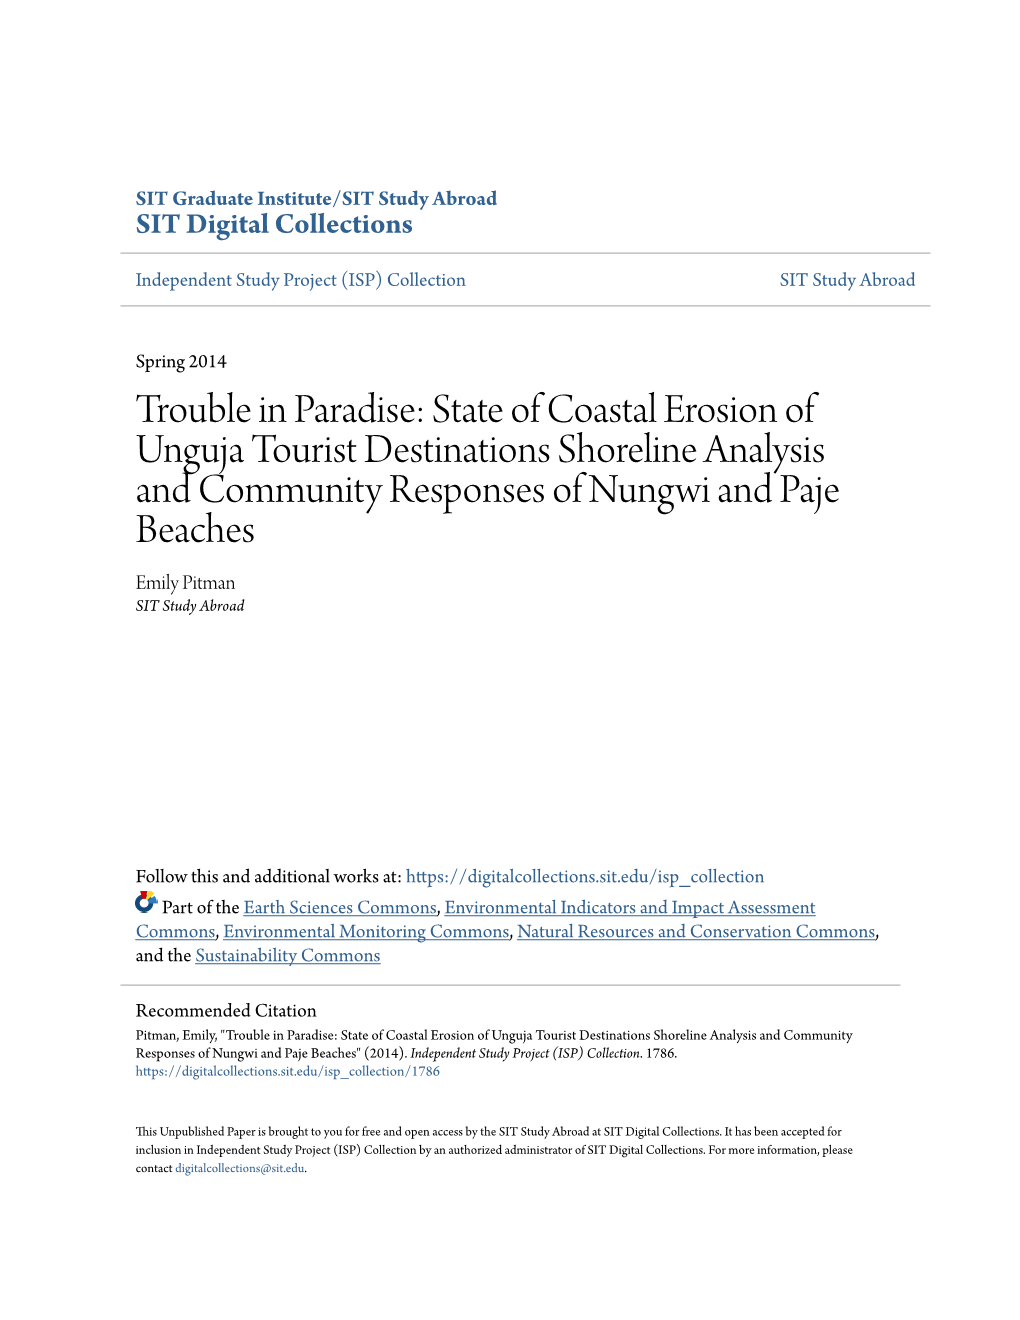 State of Coastal Erosion of Unguja Tourist Destinations Shoreline Analysis and Community Responses of Nungwi and Paje Beaches Emily Pitman SIT Study Abroad